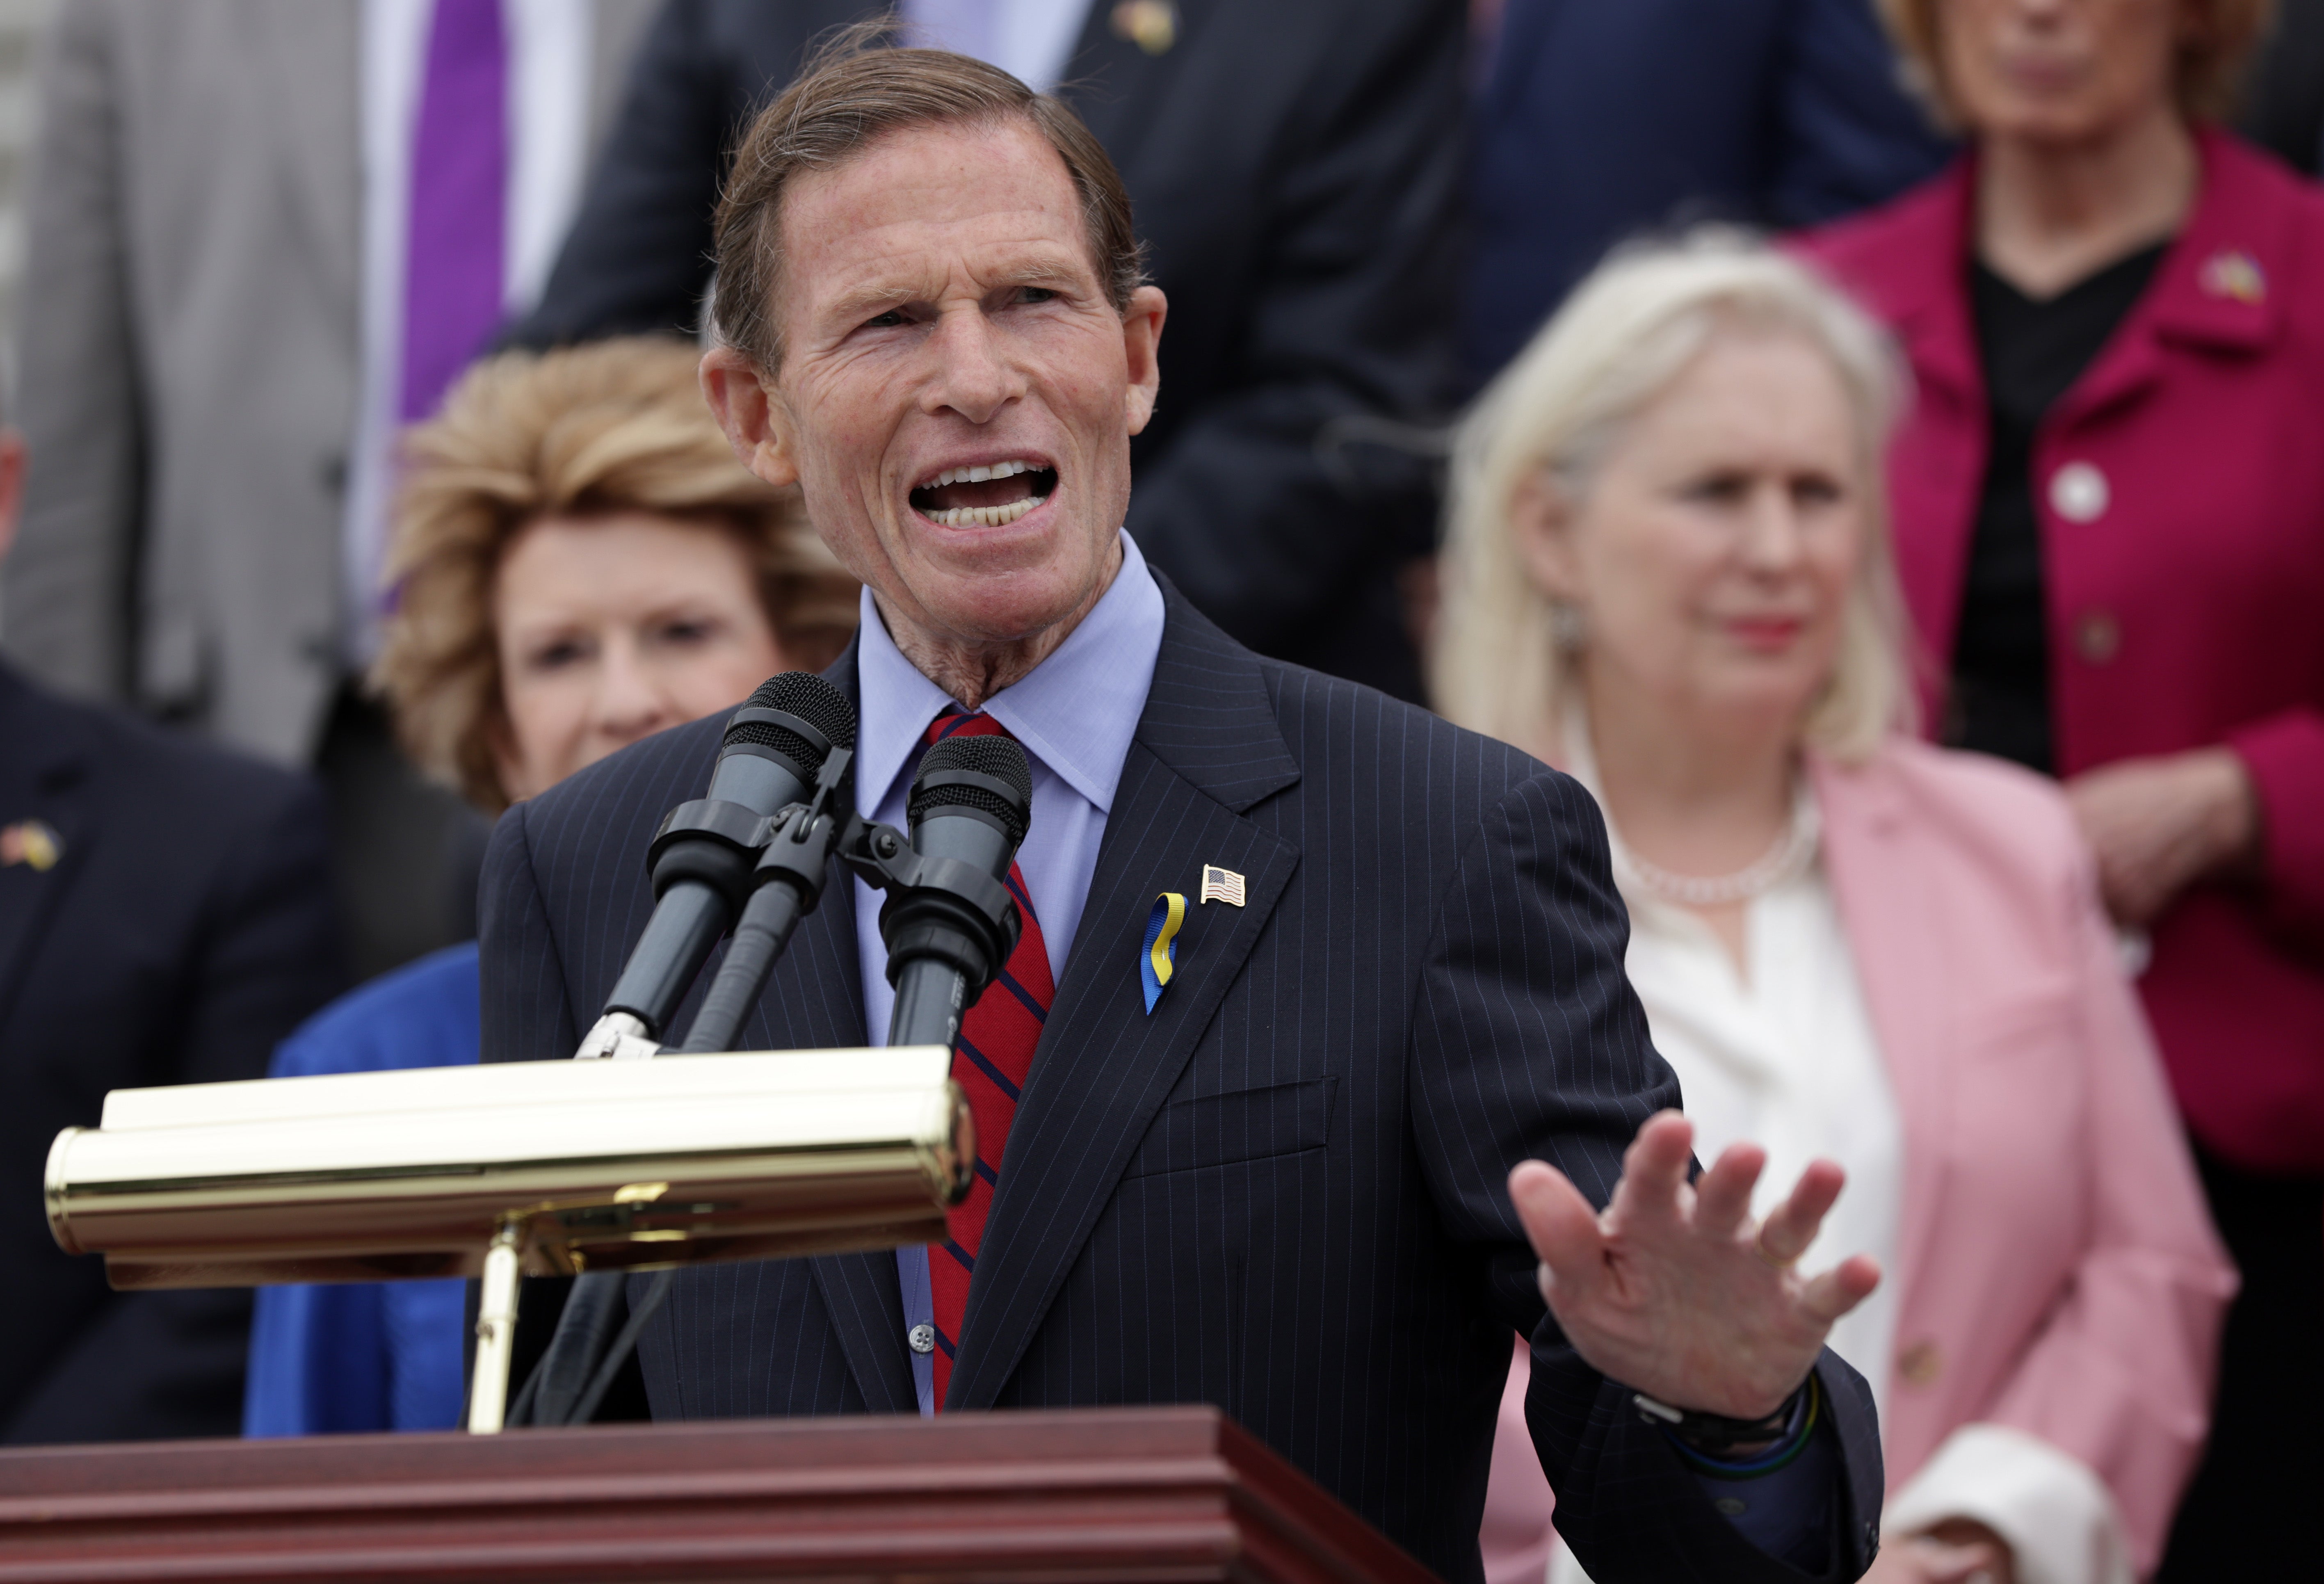 Sen. Richard Blumenthal (D-CT) speaks during an event on the leaked Supreme Court draft decision to overturn Roe v. Wade on the steps of the U.S. Capitol May 3, 2022